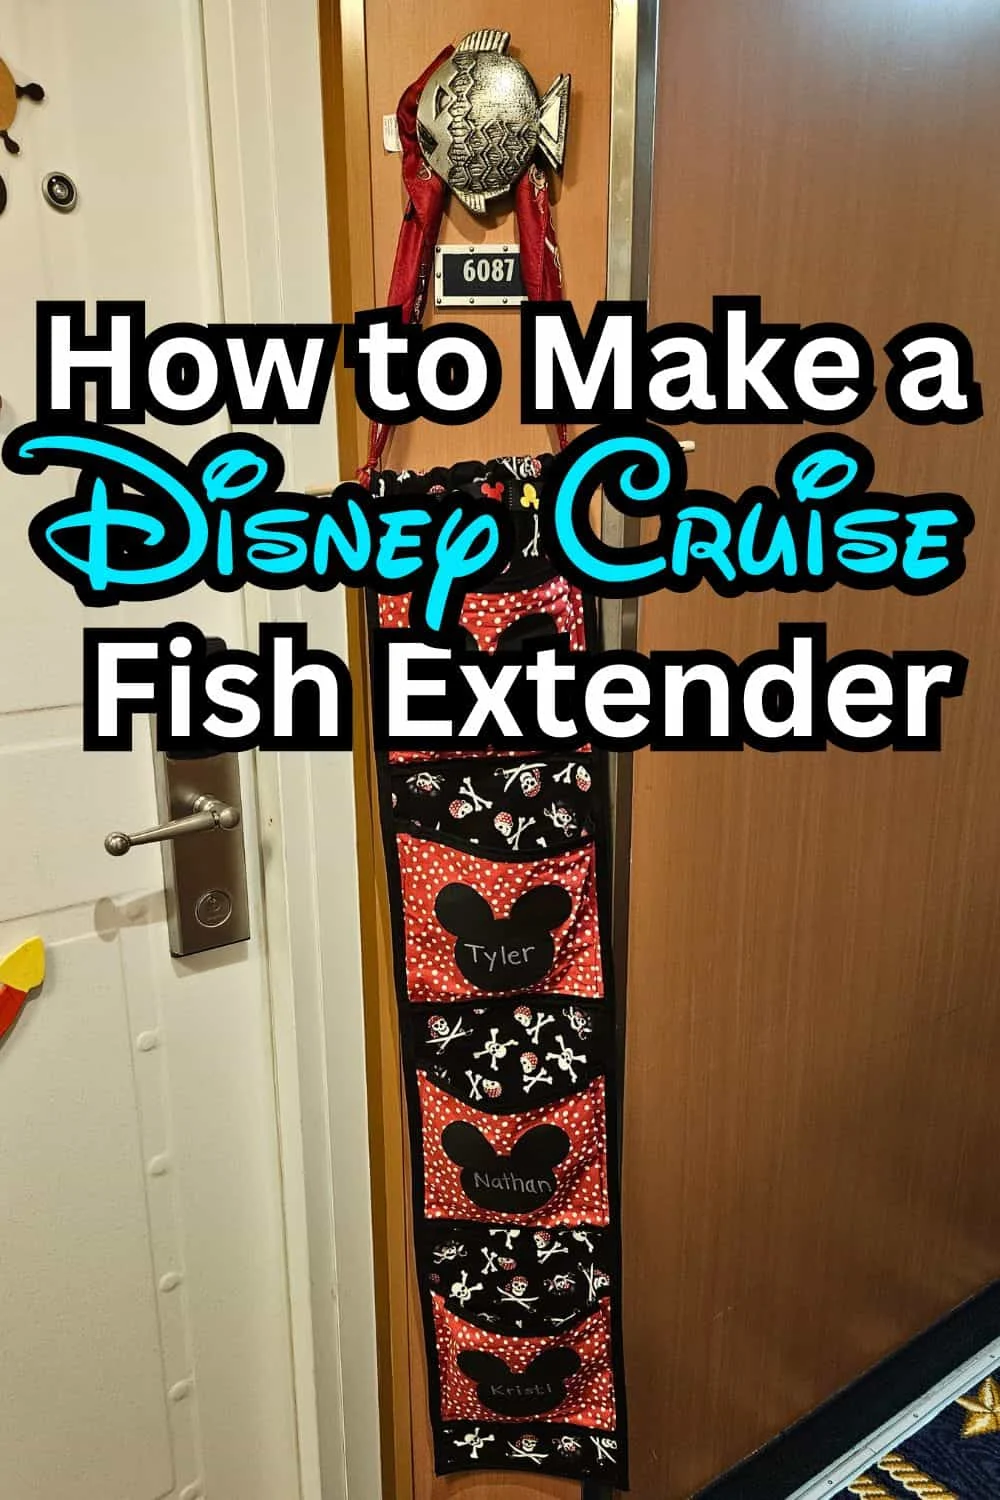 How to Make a Disney Fish Extender DIY (ish) Cheater's Guide